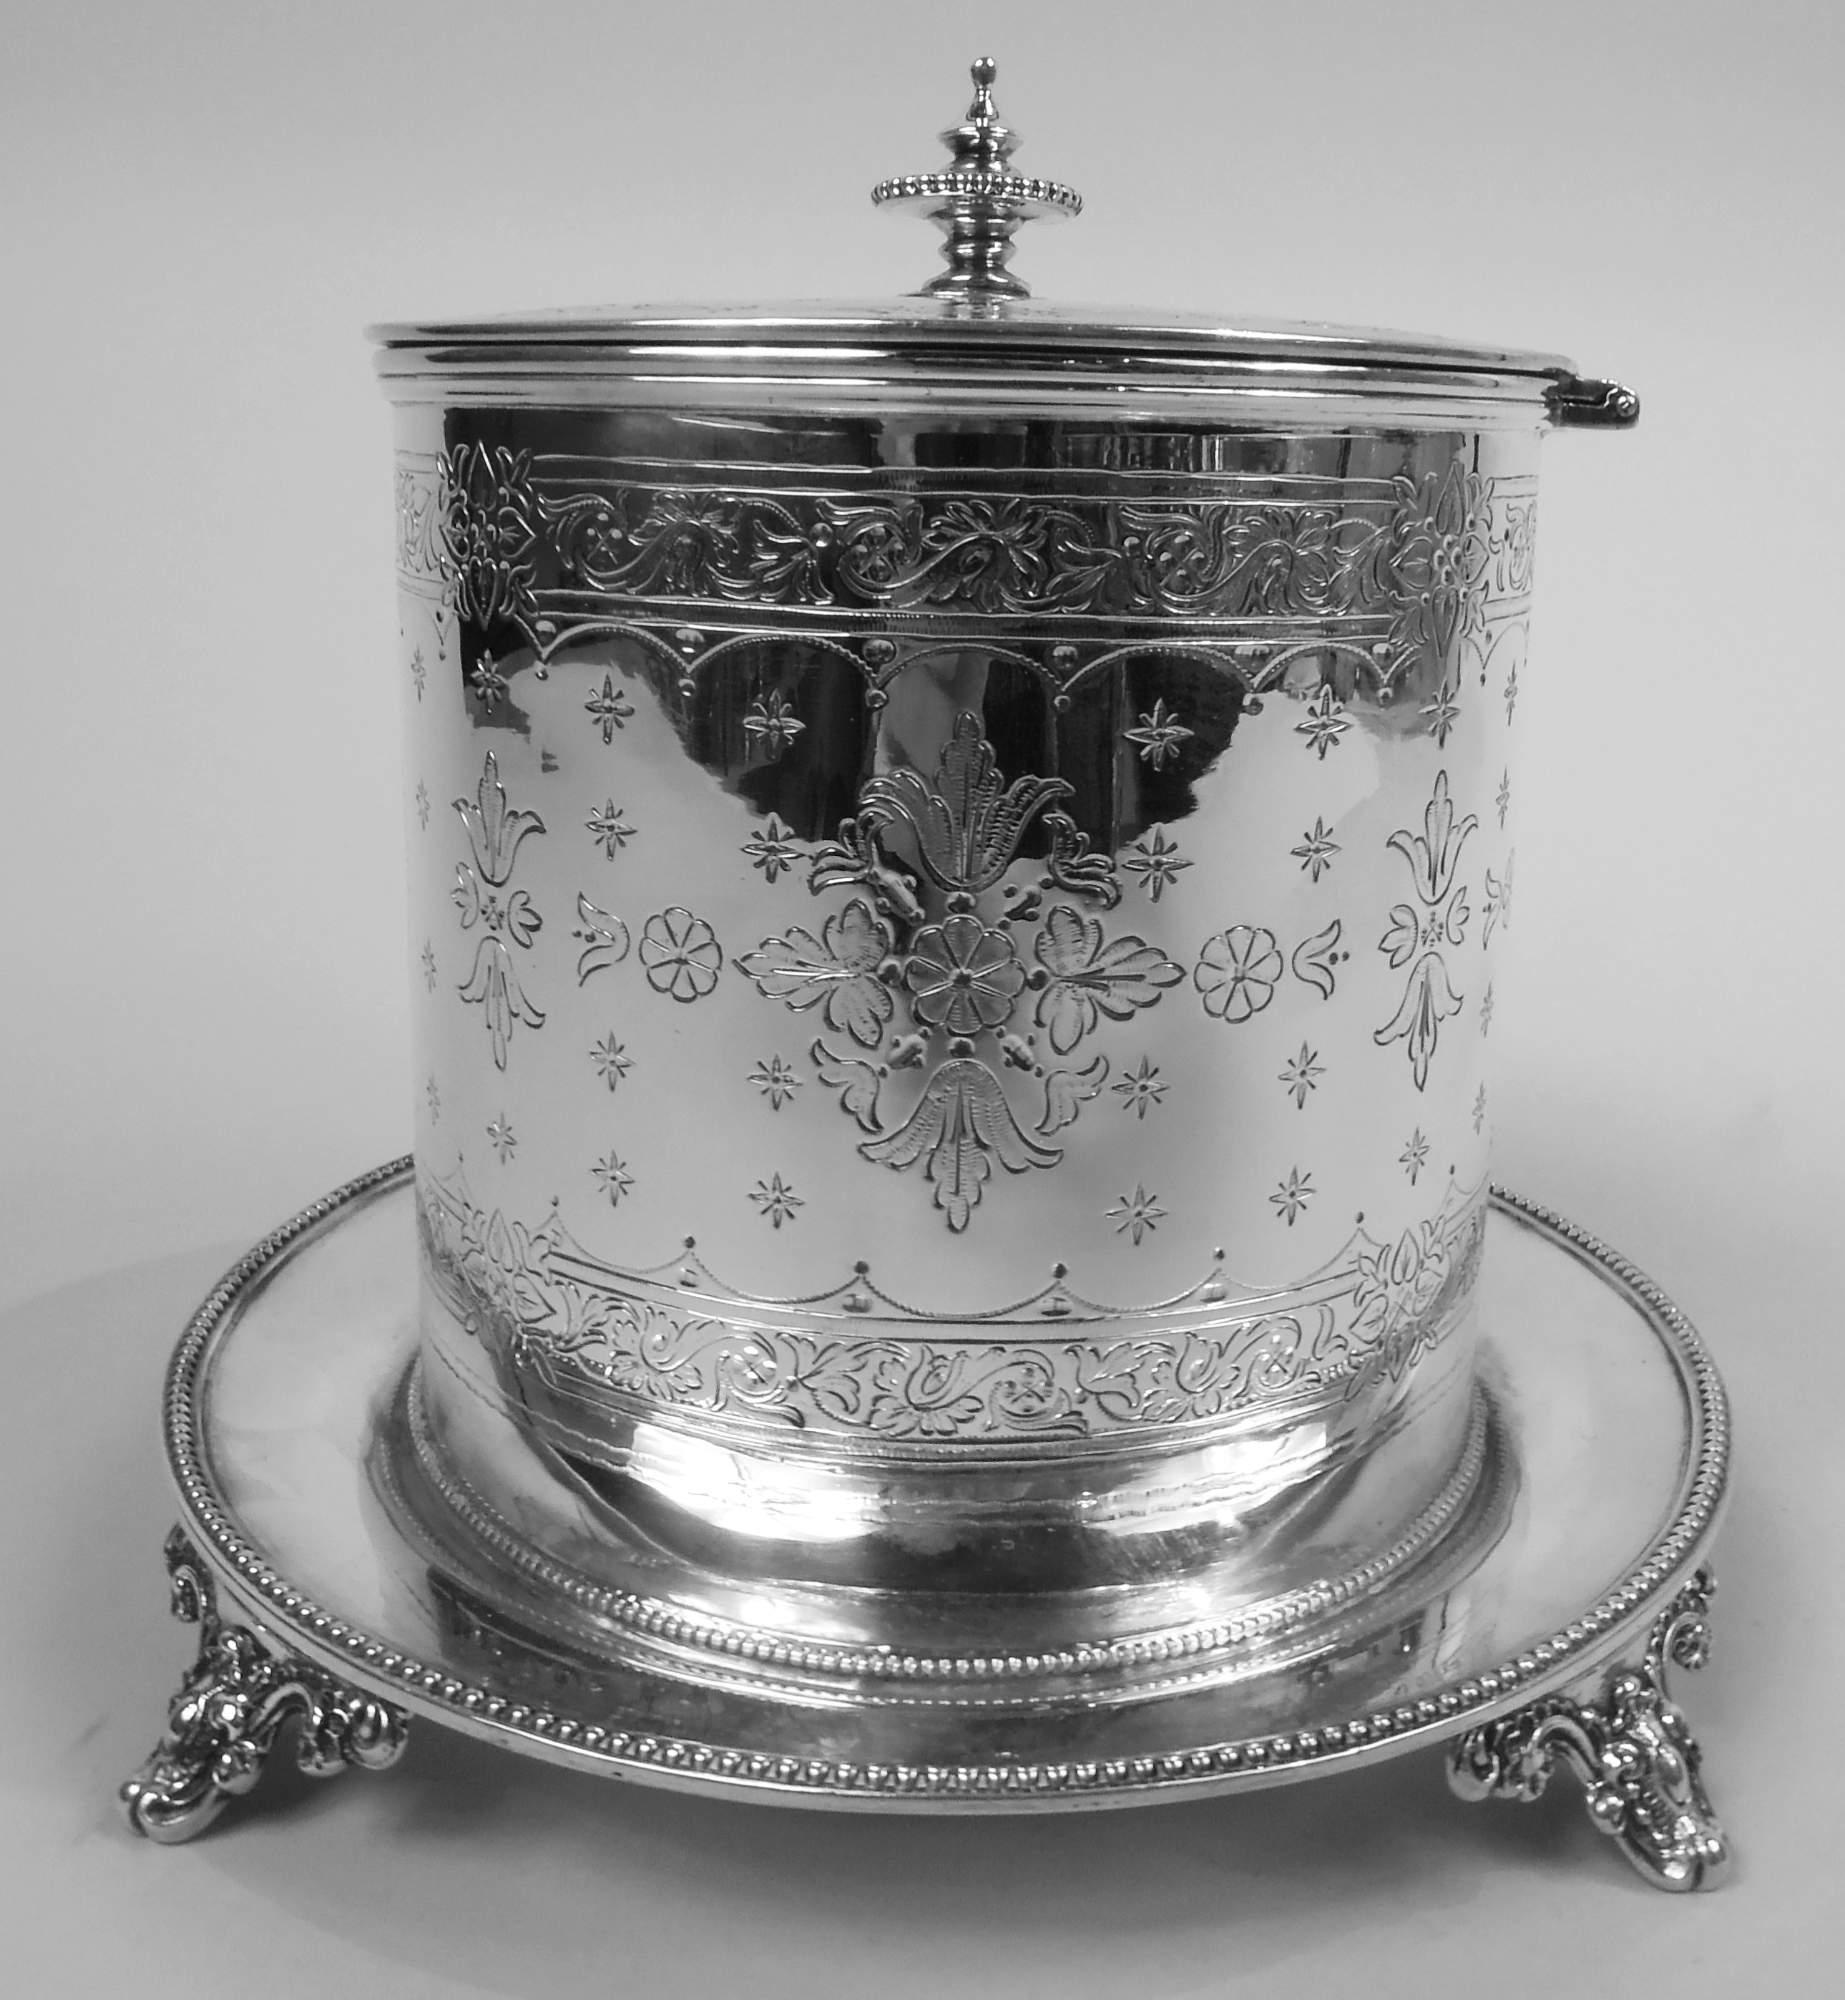 Victorian Classical sterling silver biscuit jar. Made by Henry Holland in London in 1872. Drum form; cover flat and hinged with vasiform finial. Engraved stylized floral ornament and oval frame (vacant). Mounted to round stand with four